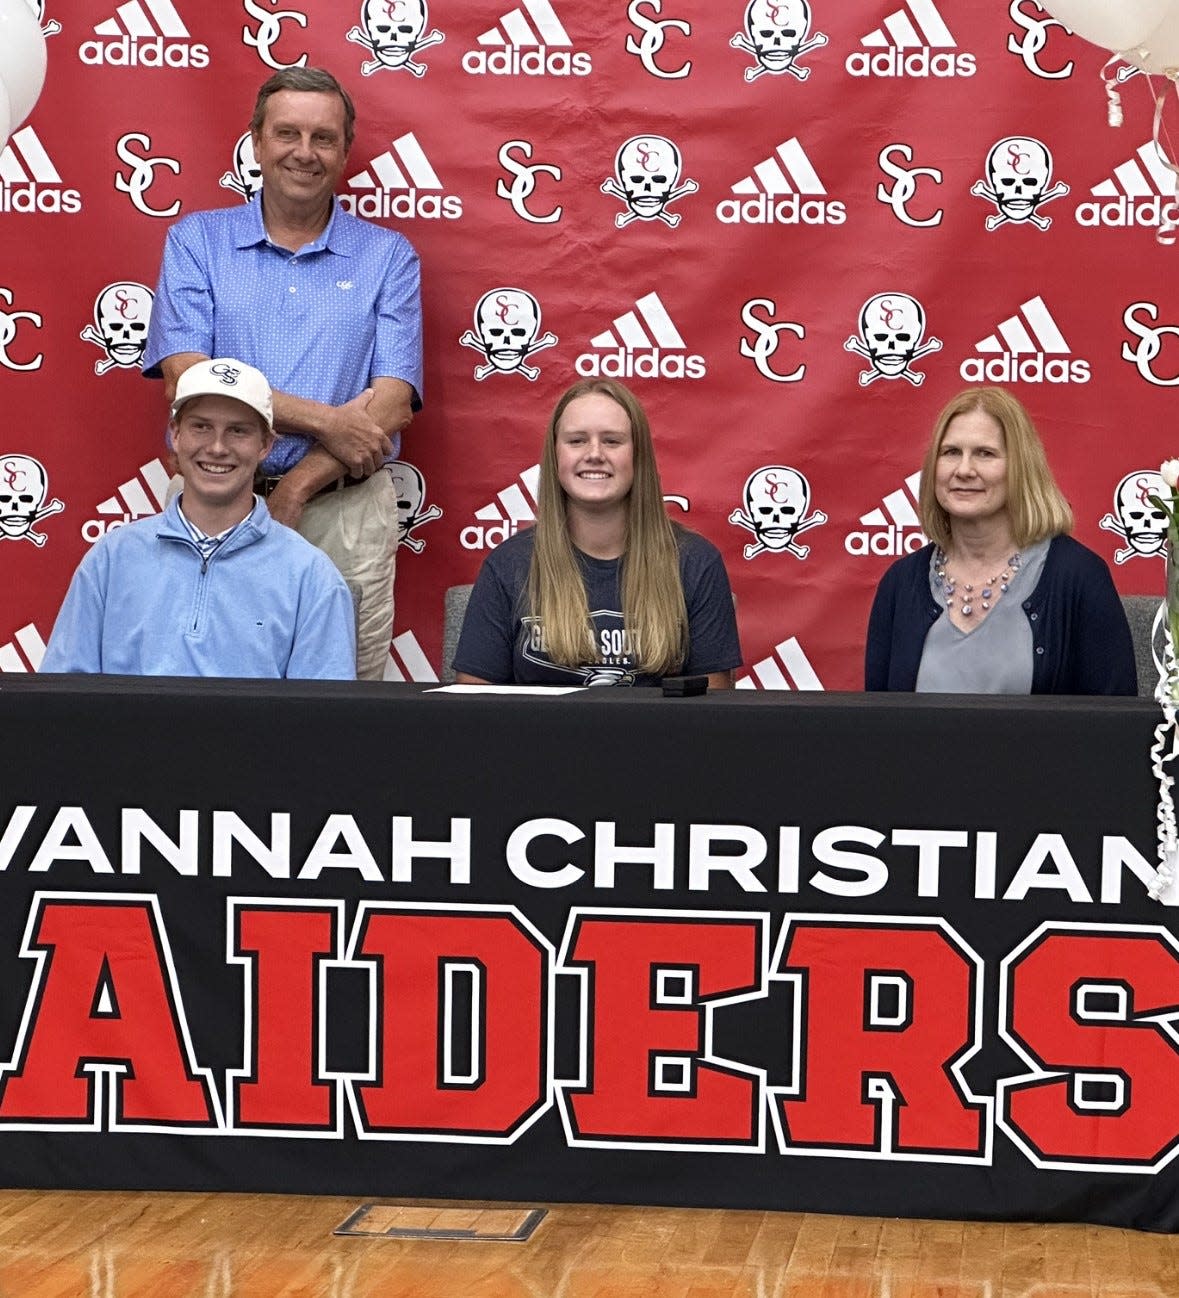 Mary Miller of Savannah Christian, pictured with her family, signed to play golf at Georgia Southern Wednesday.